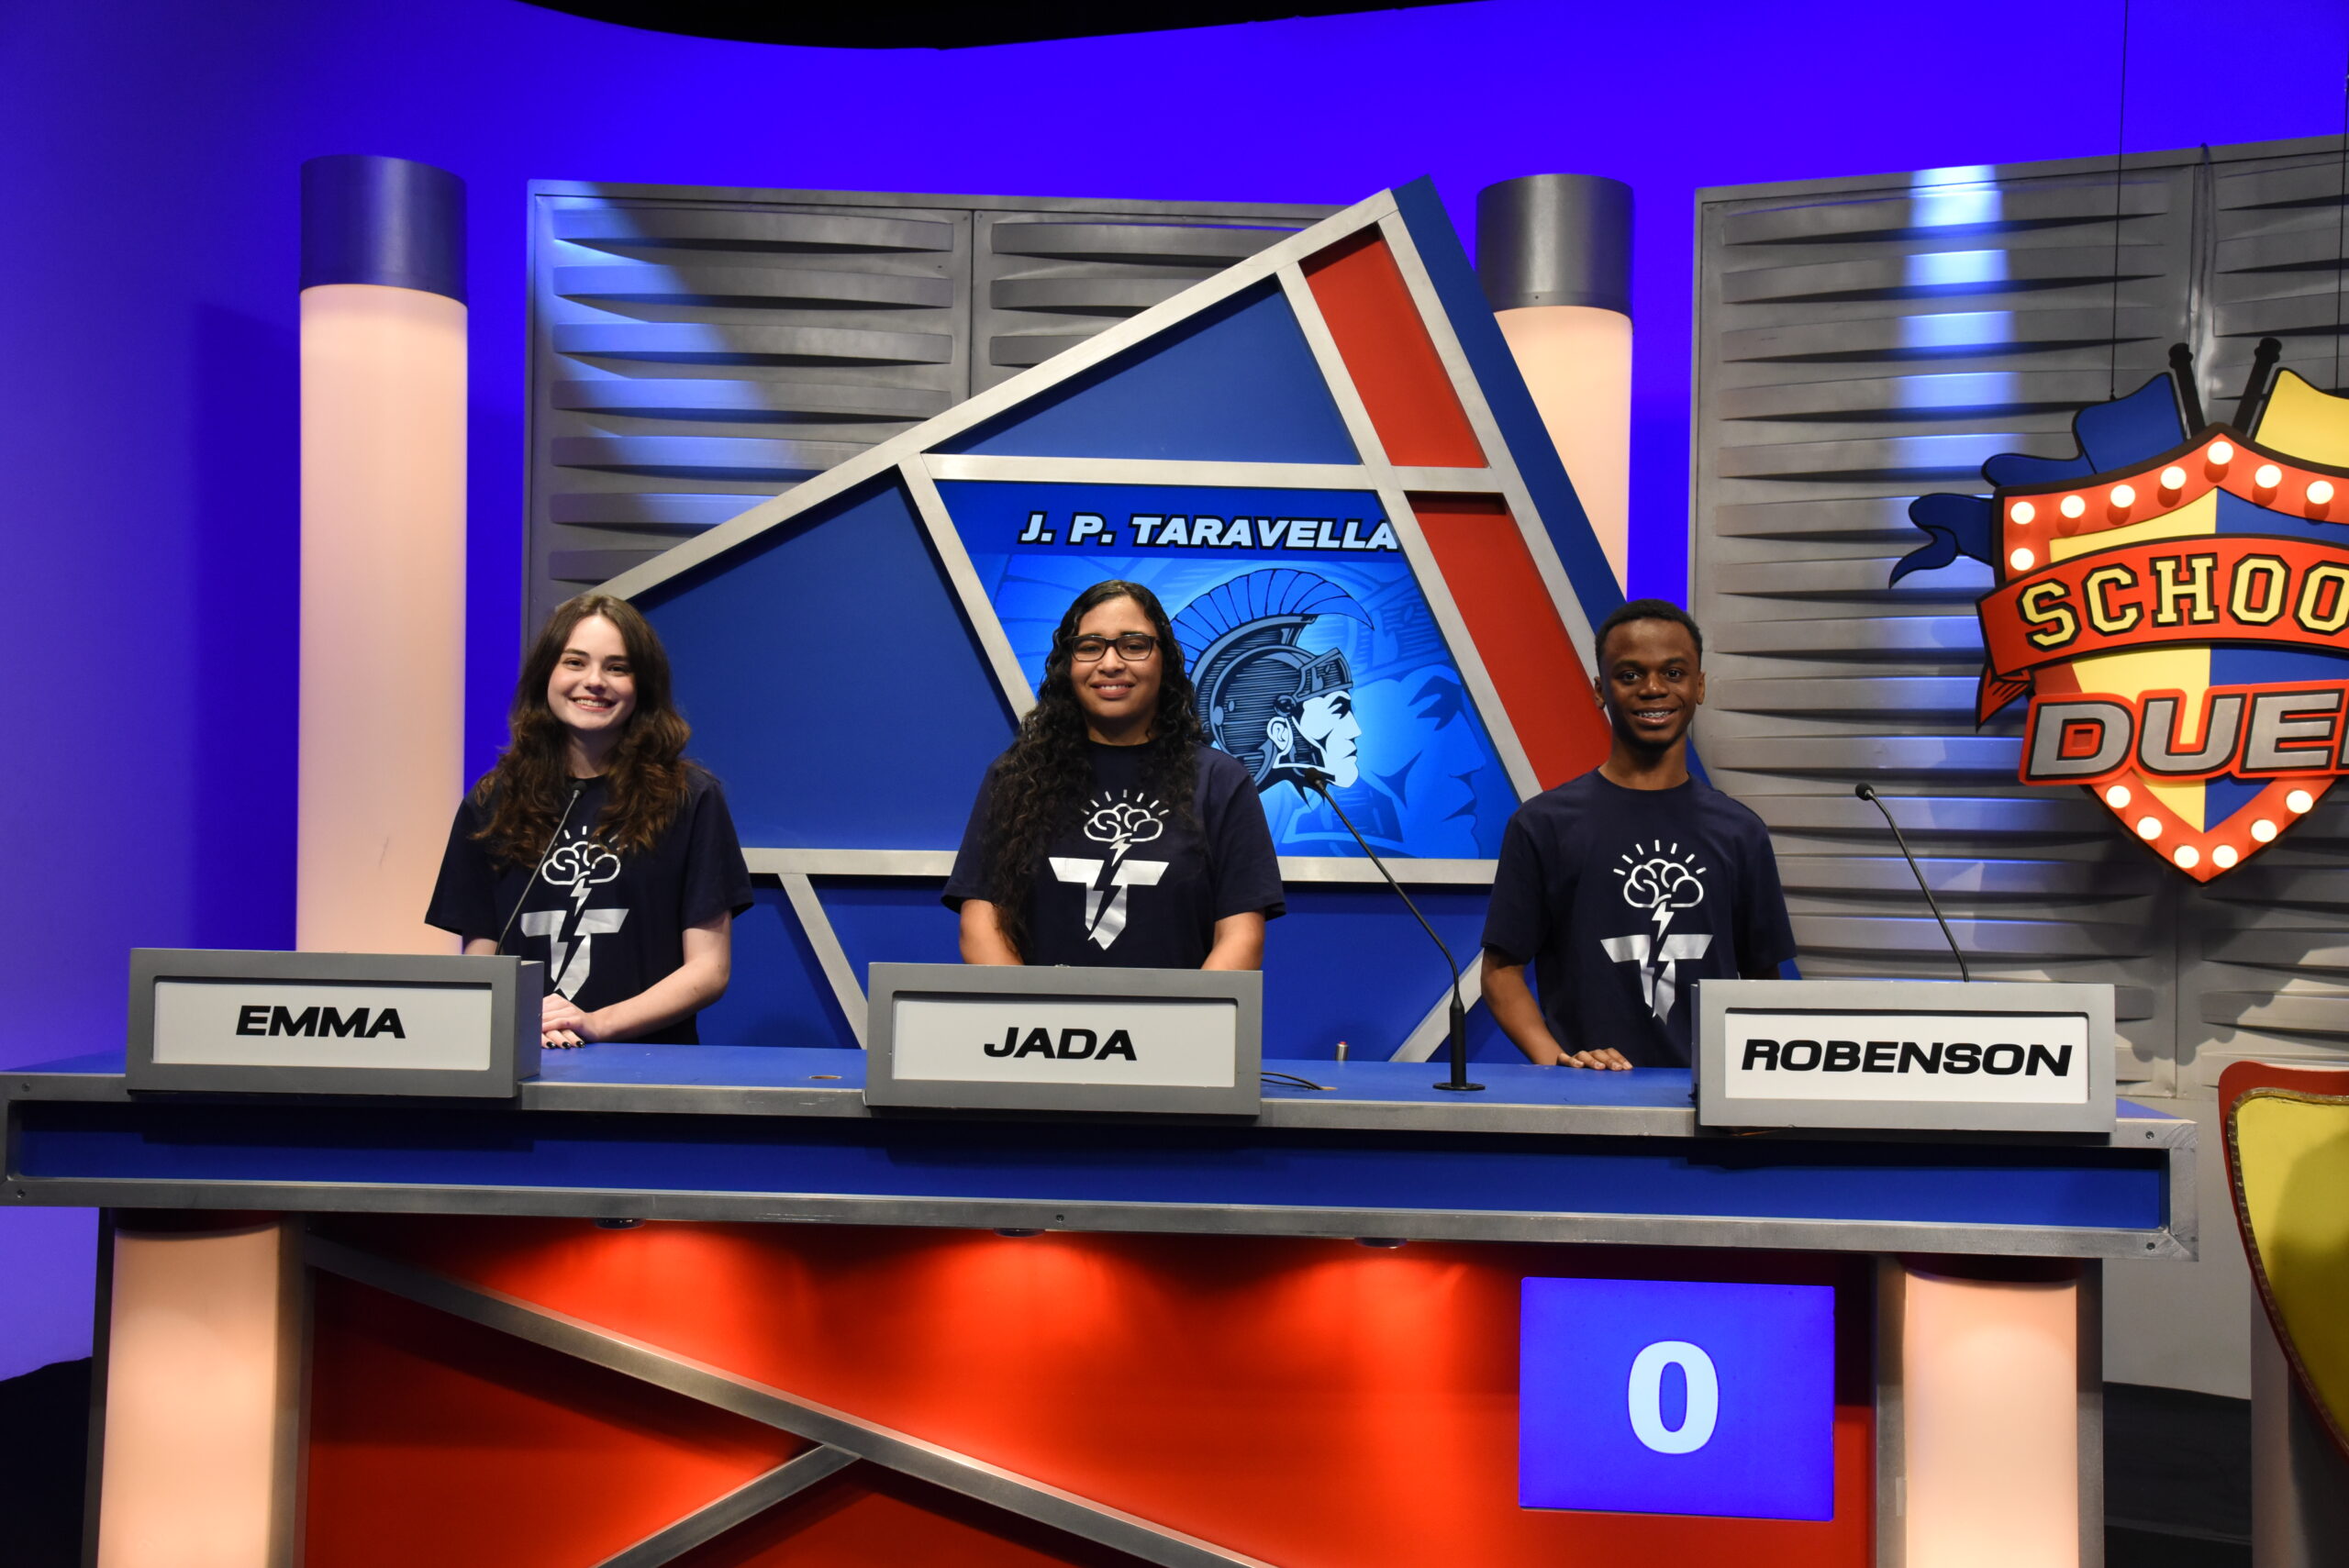 Battle of the Brains: J.P. Taravella Competes on Episode of School Duel